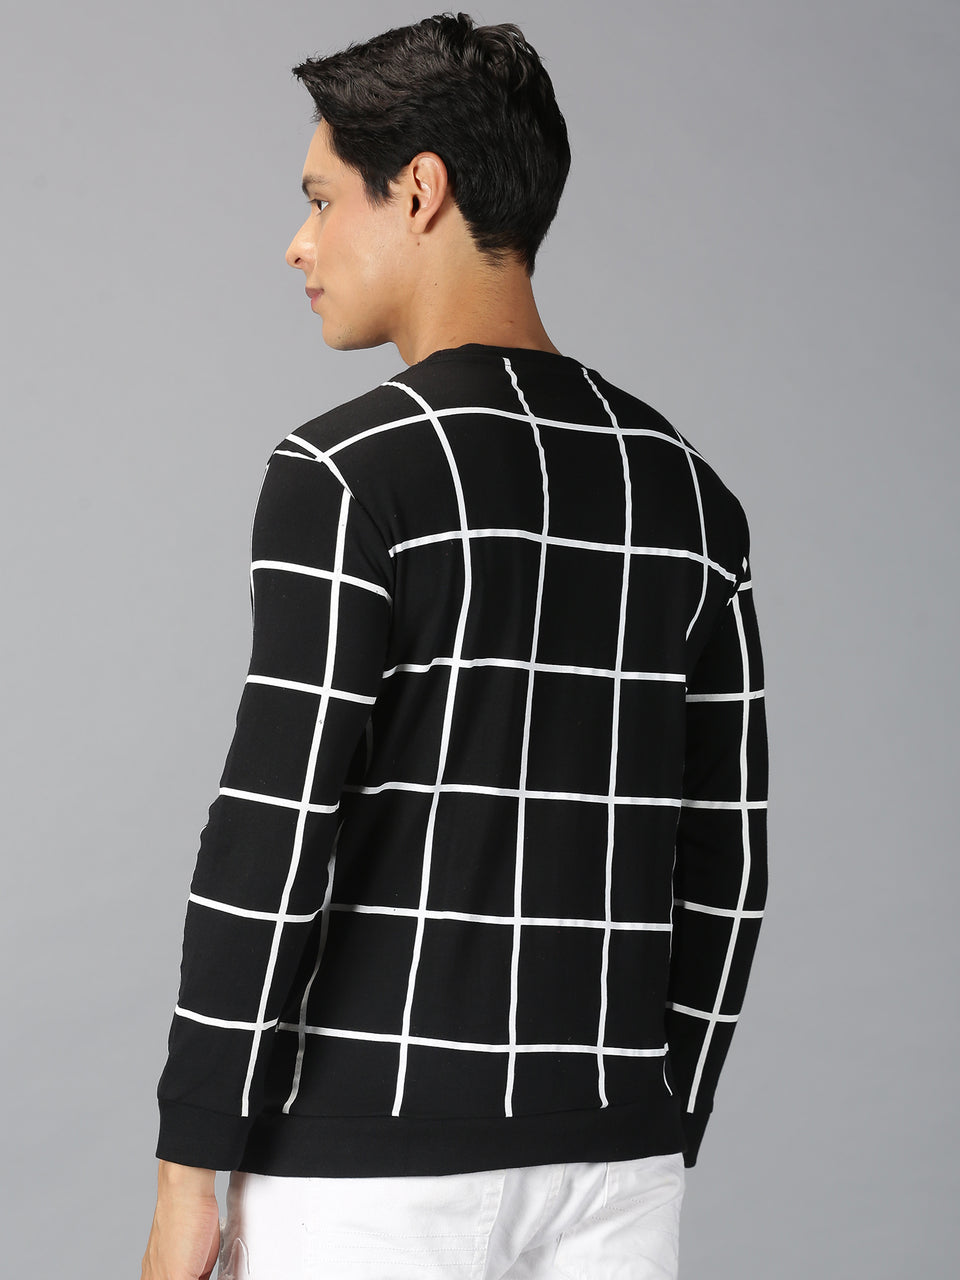 Men Black White Checked Printed Round Neck Full Sleeve Regular Fit Recycled Cotton Casual T-Shirt